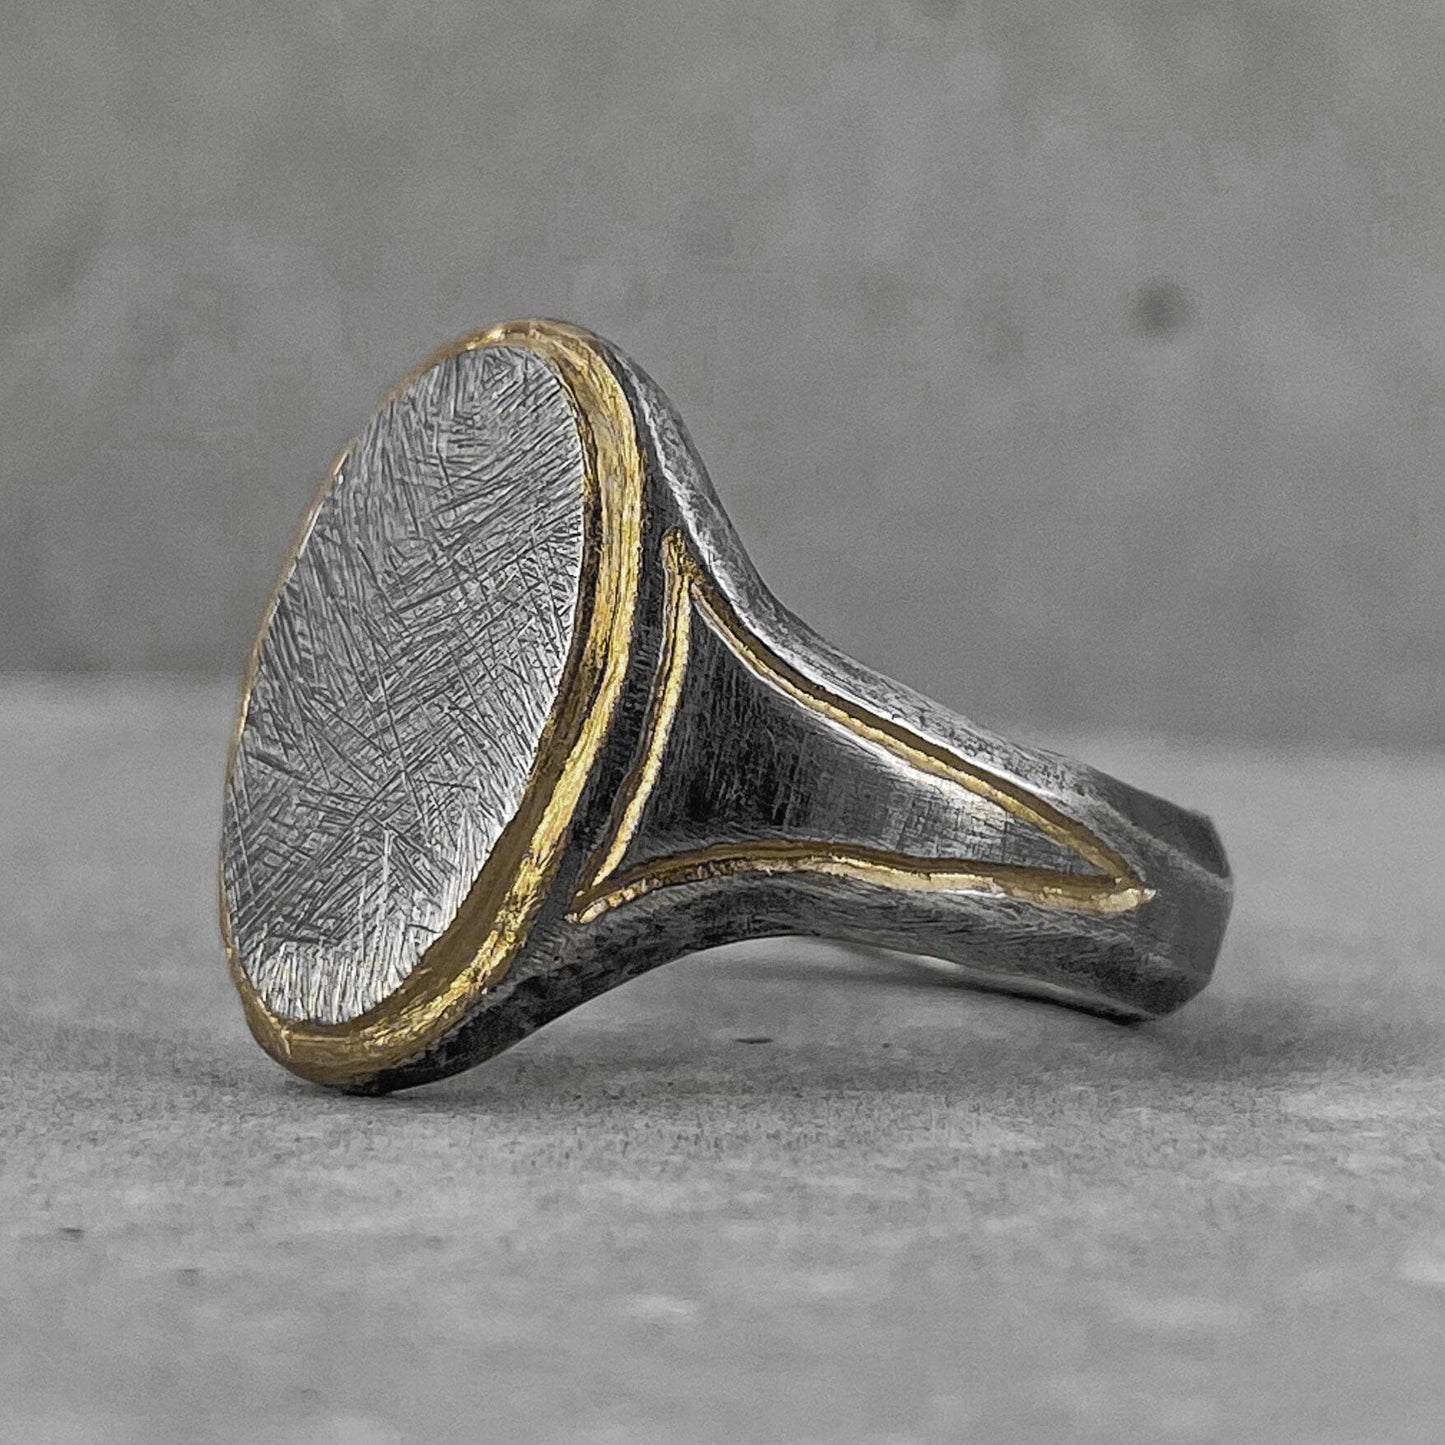 Oval ring- Elegant oval ring with gold plated elements and scratched texture Rings with smooth texture Project50g 